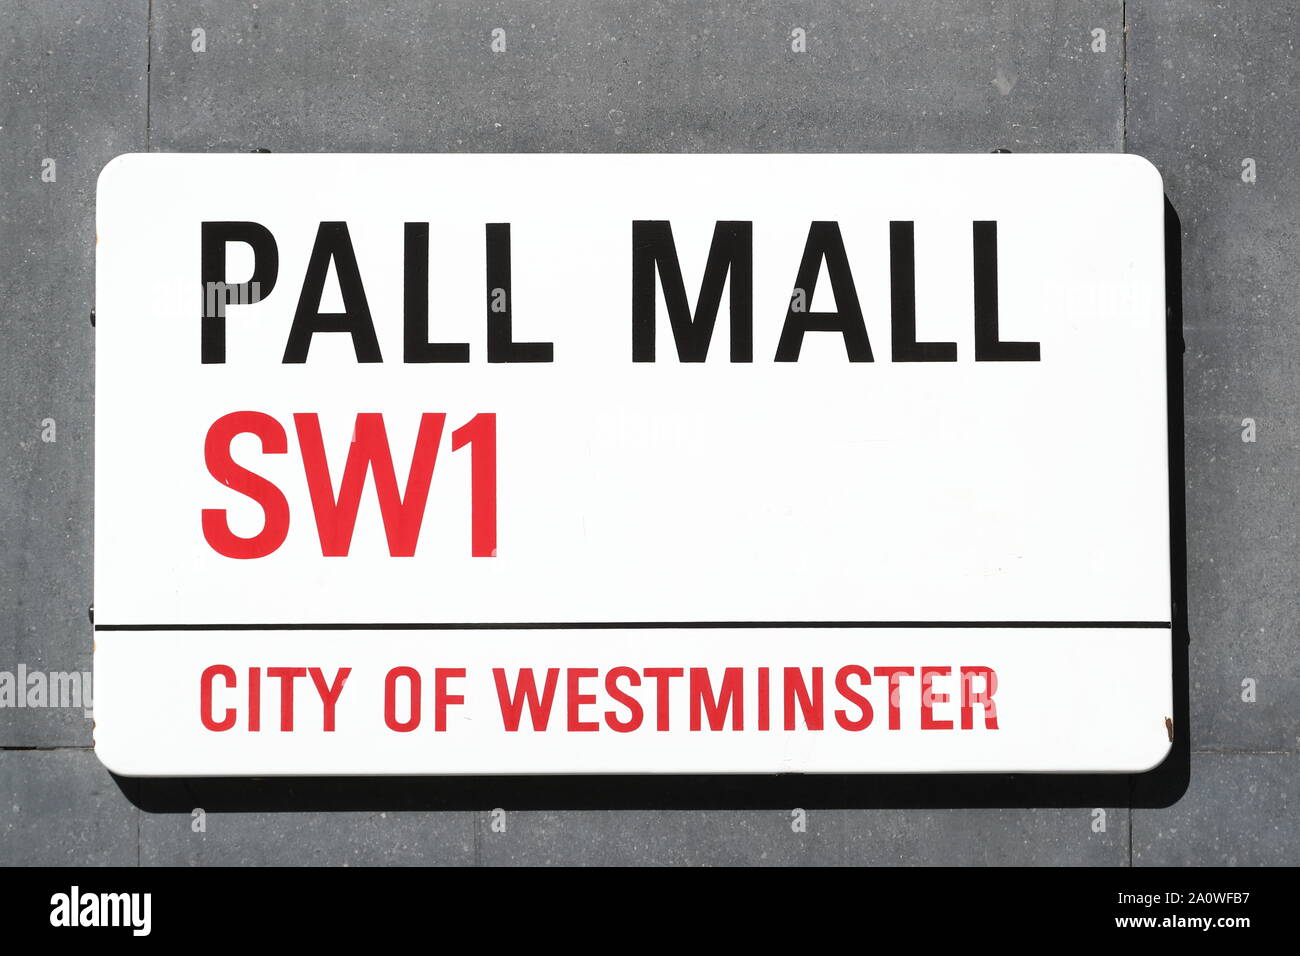 Street sign at Pall Mall, Westminster, London, UK Stock Photo